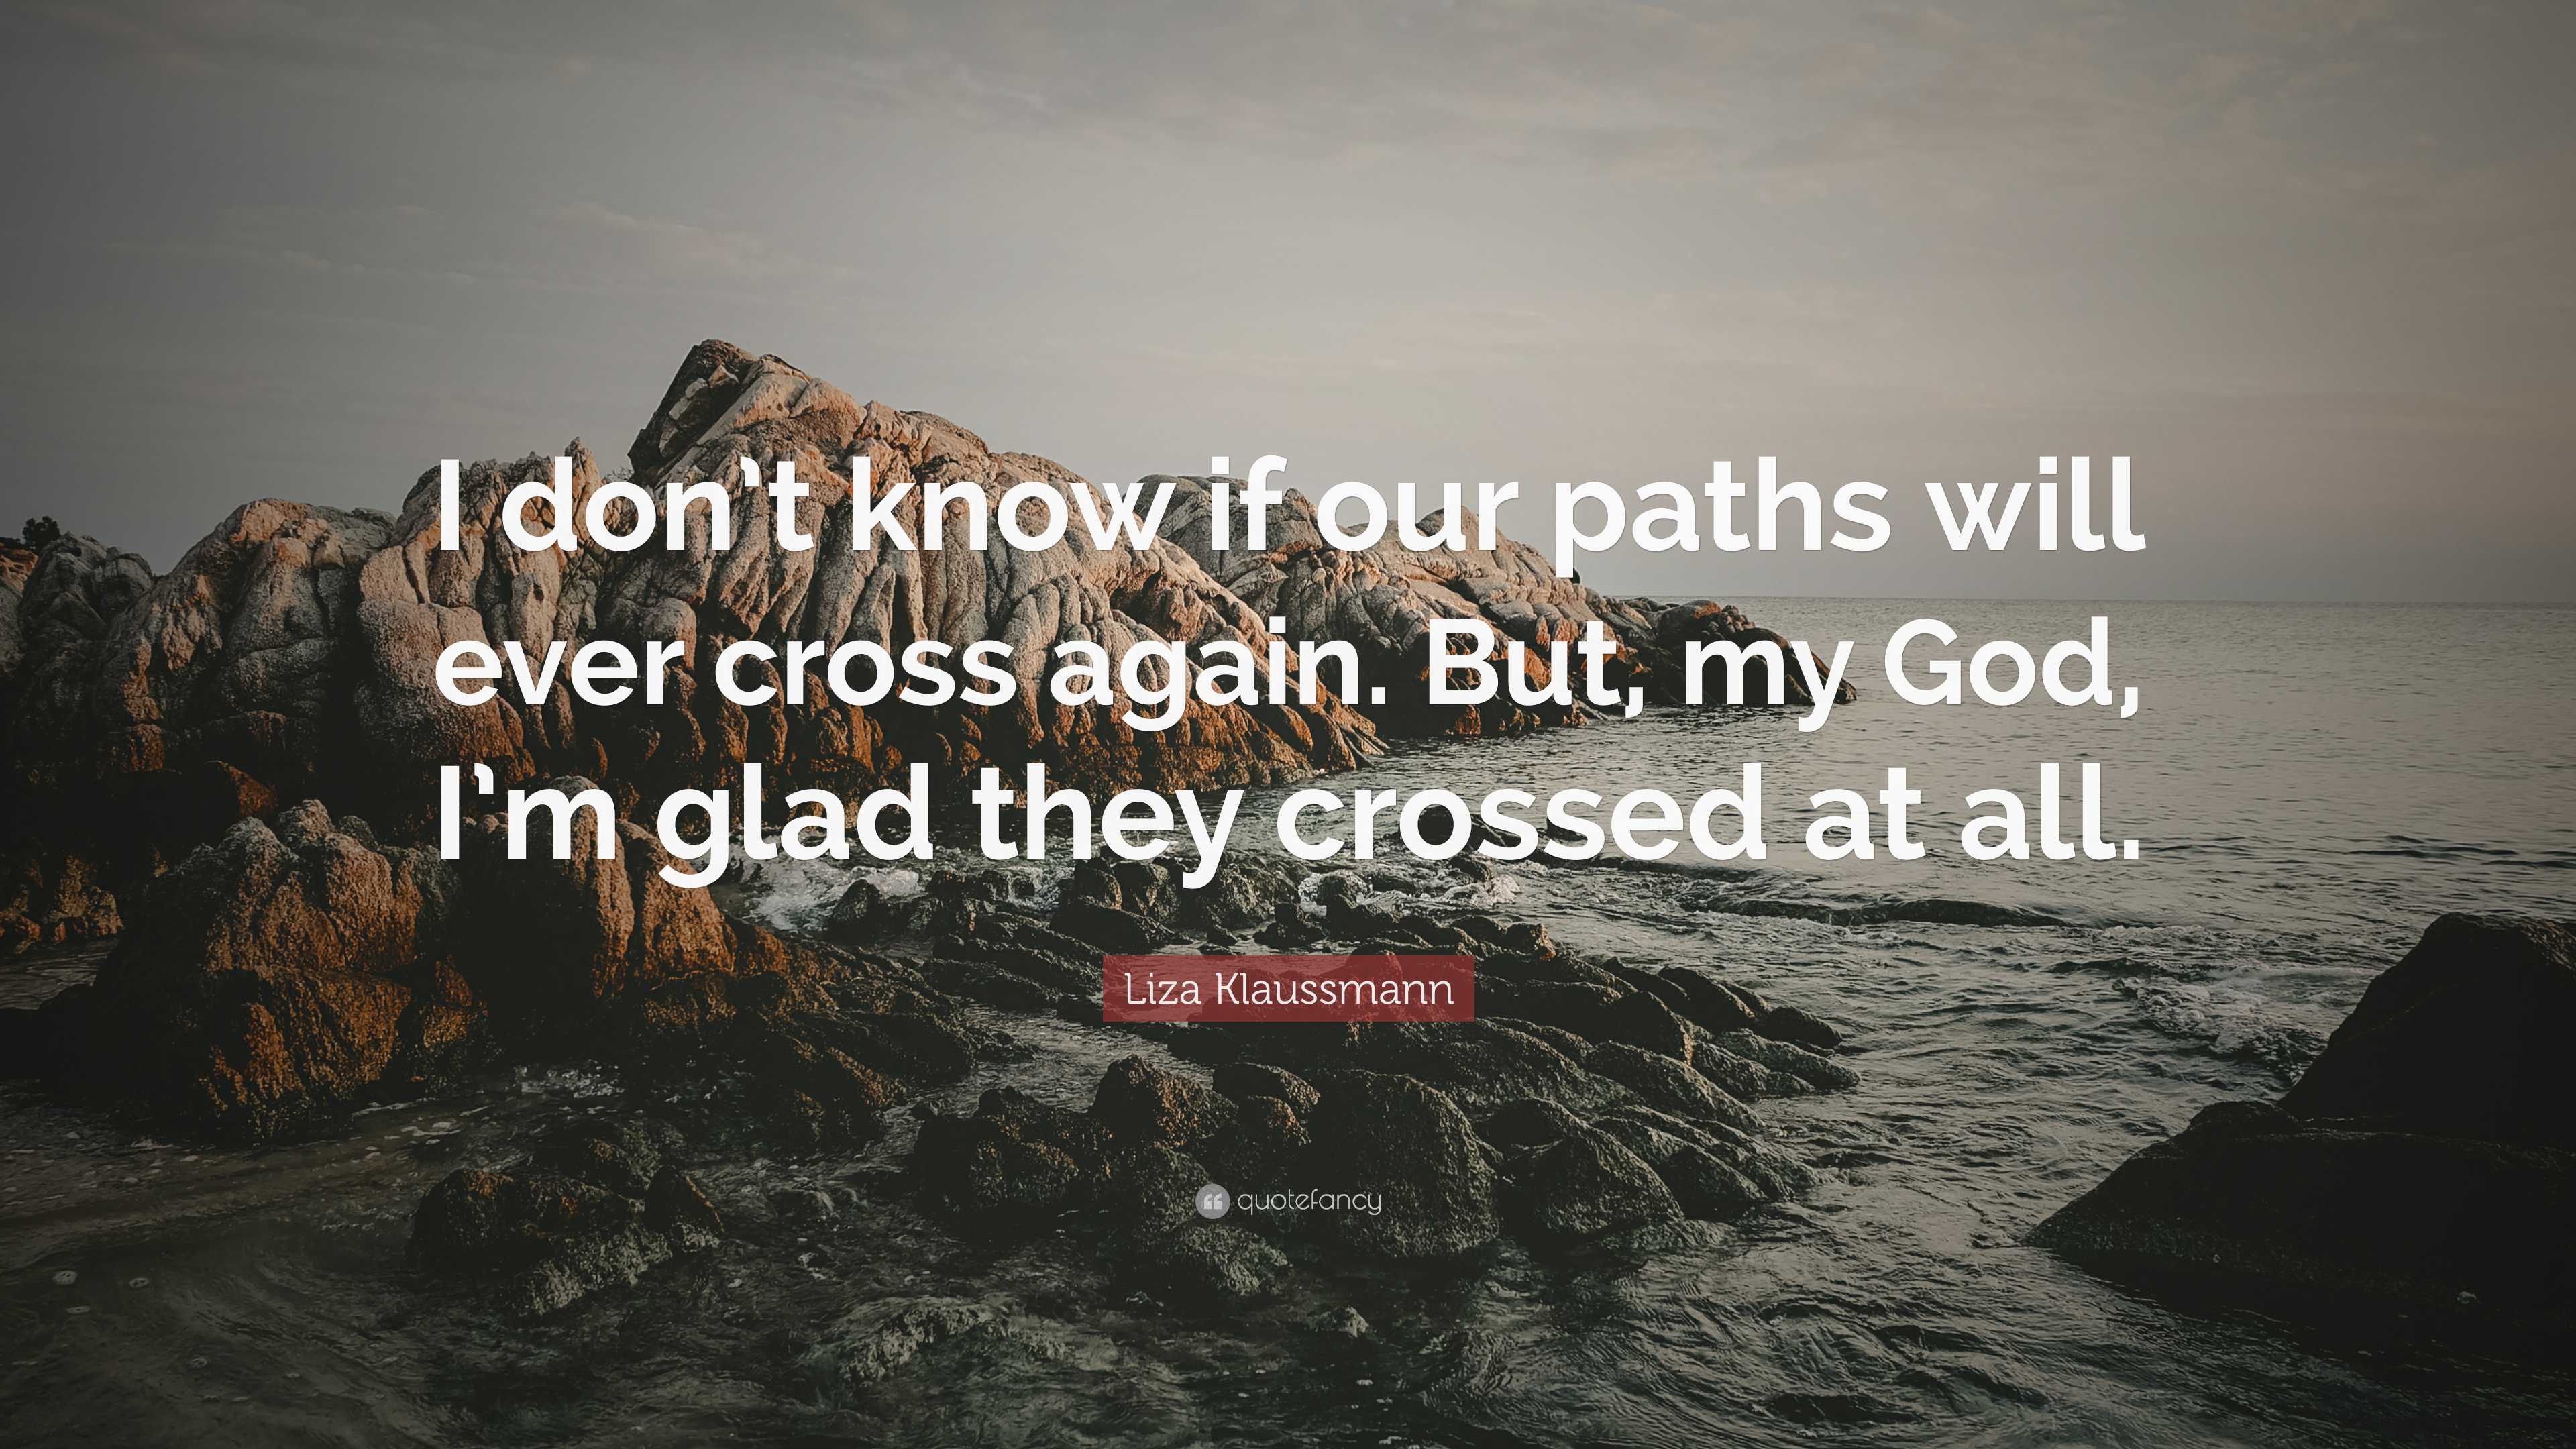 Liza Klaussmann Quote: “I don't know if our paths will ever cross again.  But, my